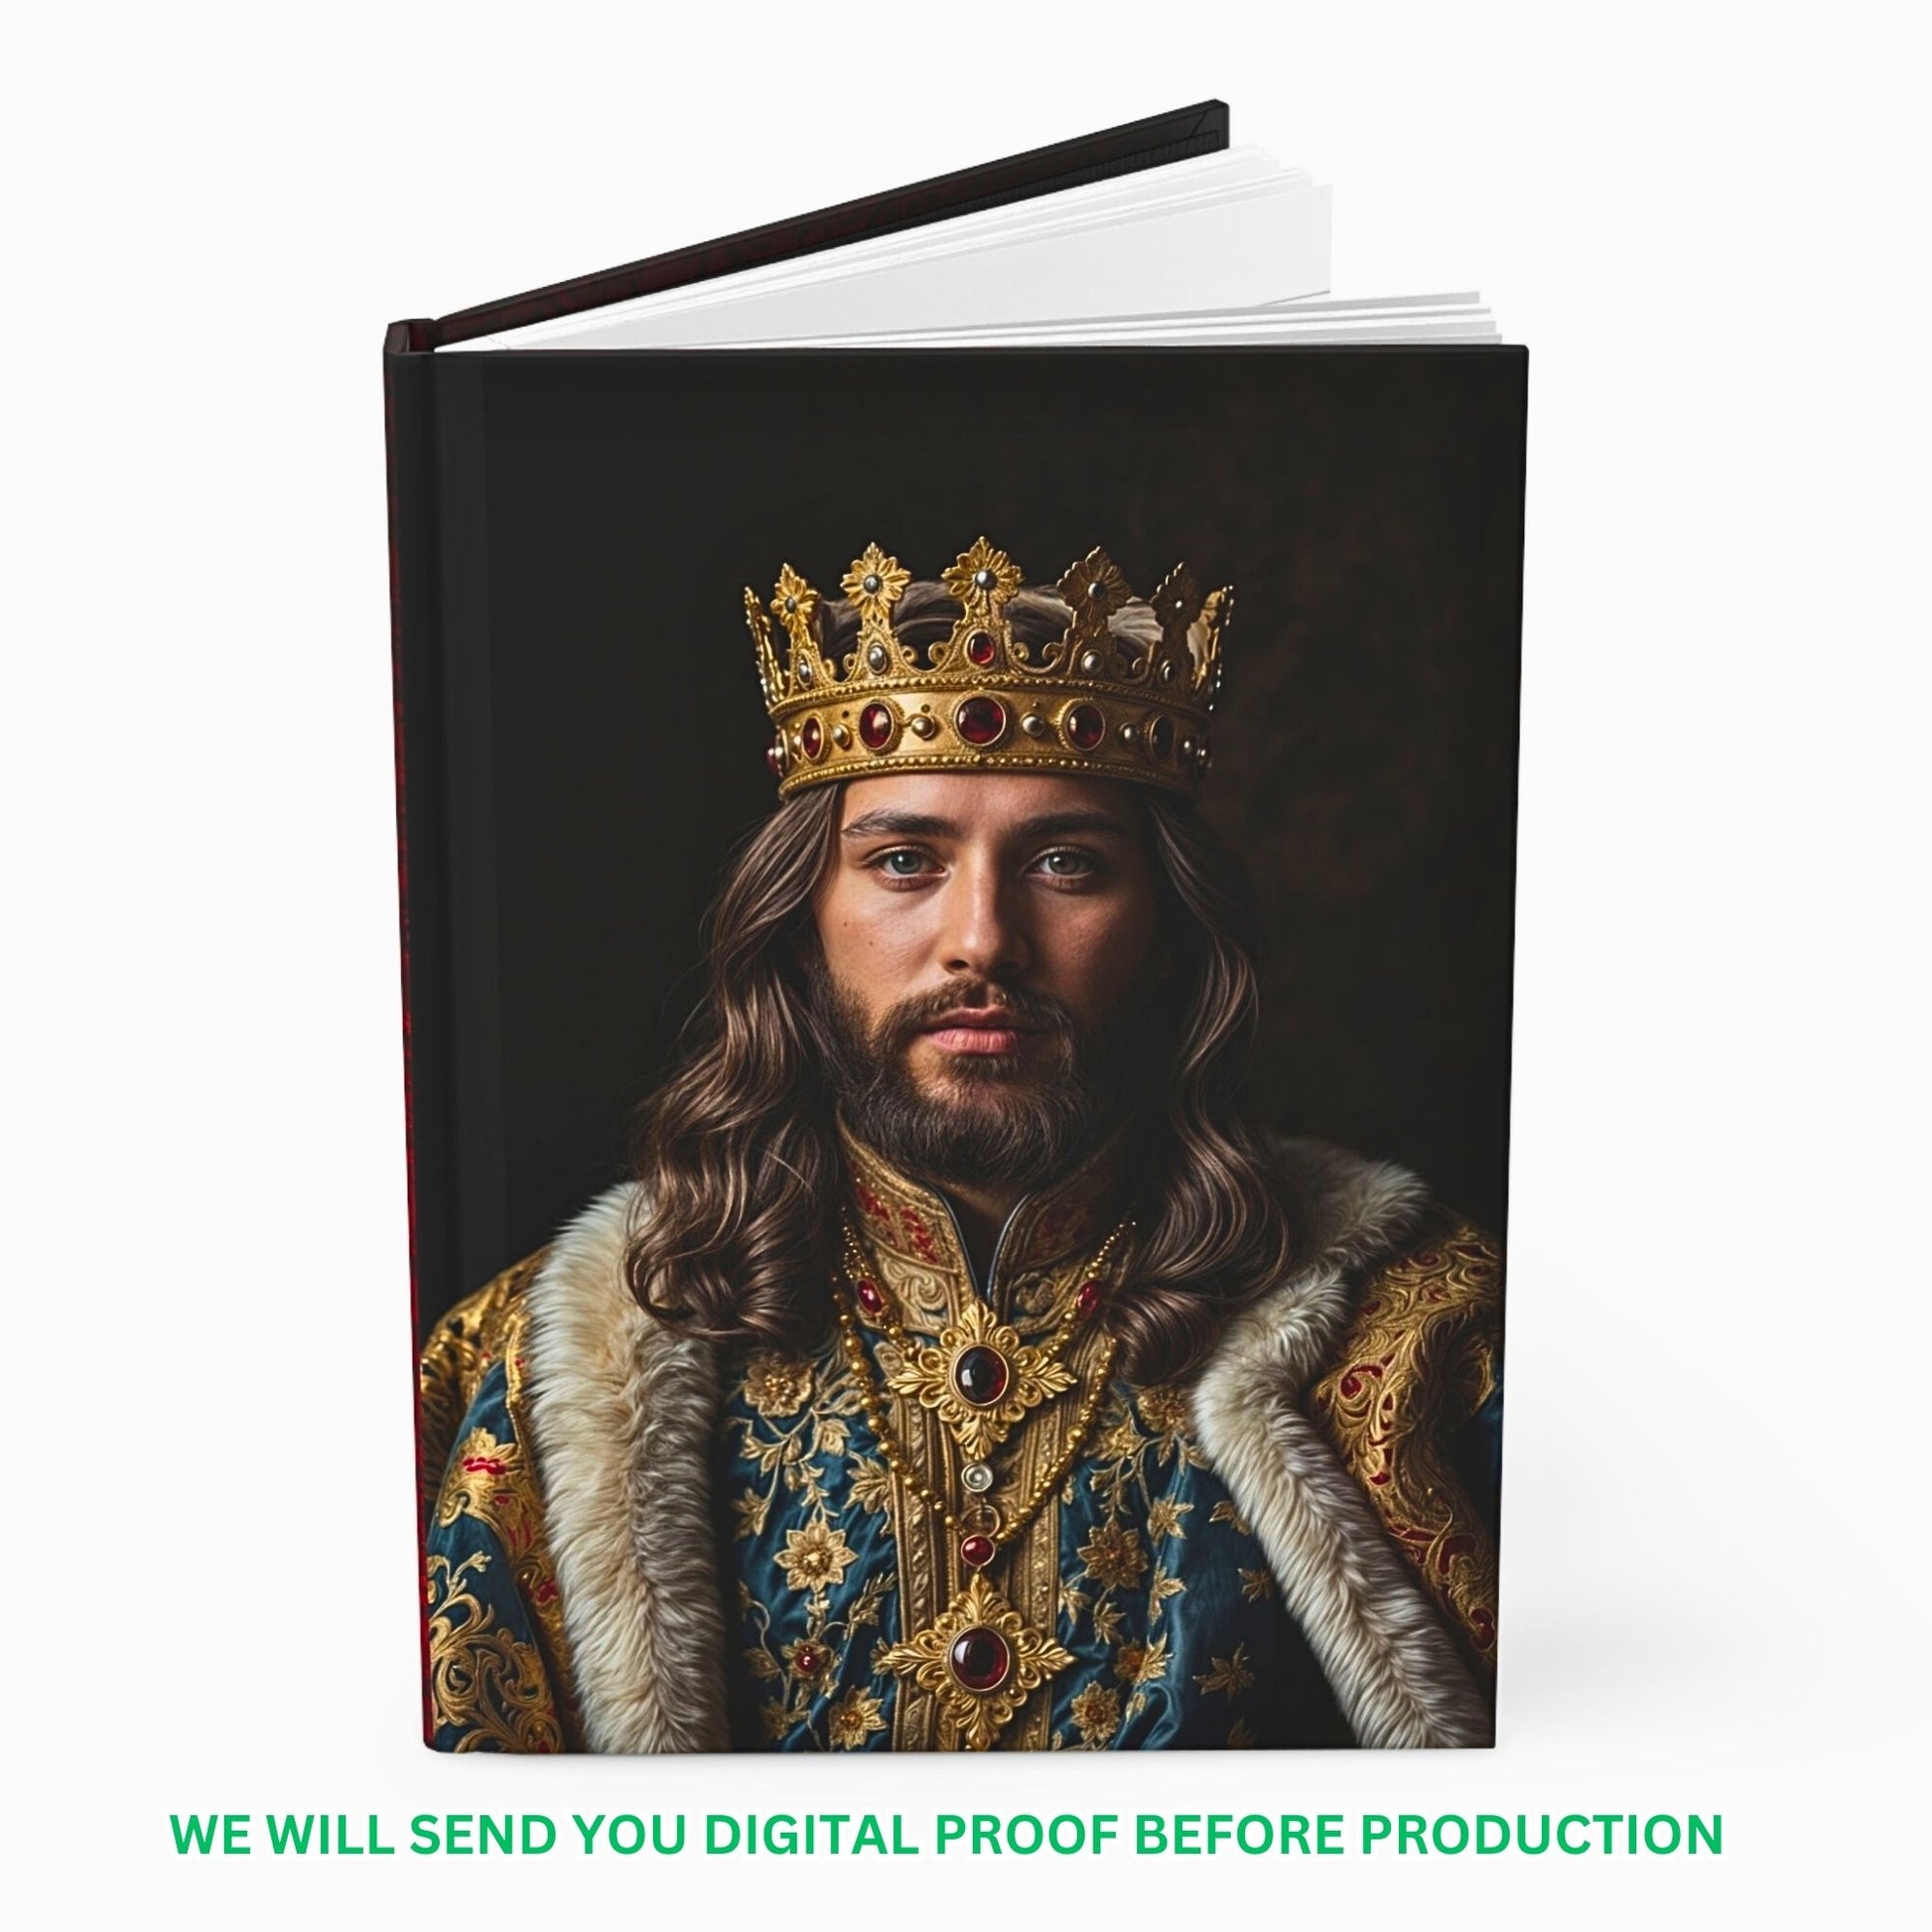 Create lasting memories with our Custom Photo Journals, perfect for husbands and boyfriends. Personalize your gift with our Royal Journal or Renaissance Couple Journal, ideal for anniversaries and special occasions. Explore unique designs that celebrate love and relationships. Shop now for the perfect personalized gift!